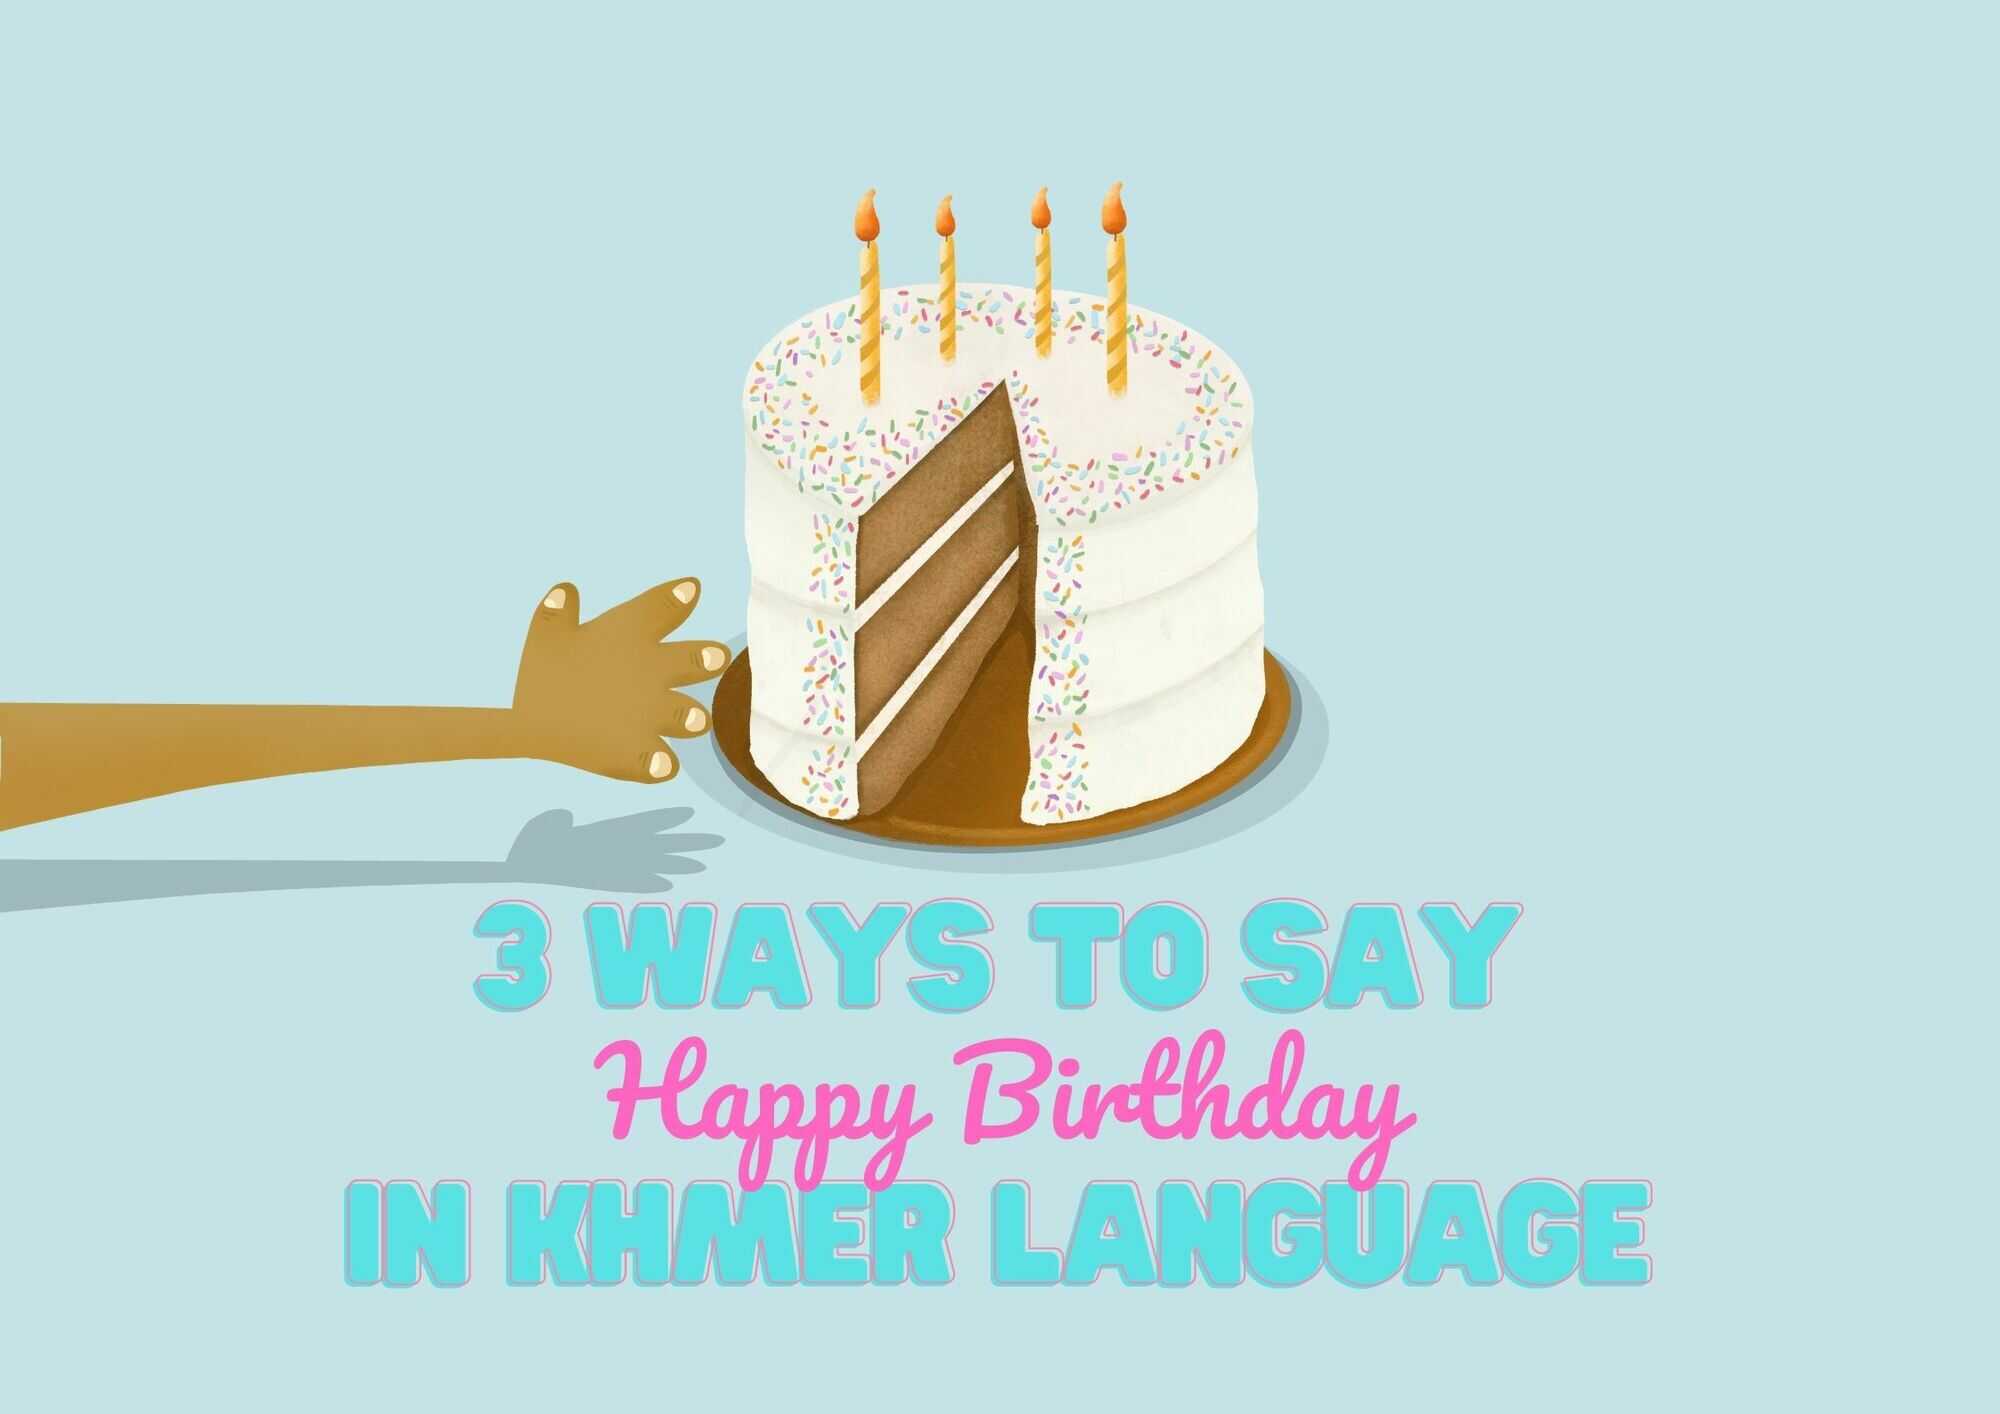 20 Ways To Say Happy Birthday In Khmer Language  Ling App